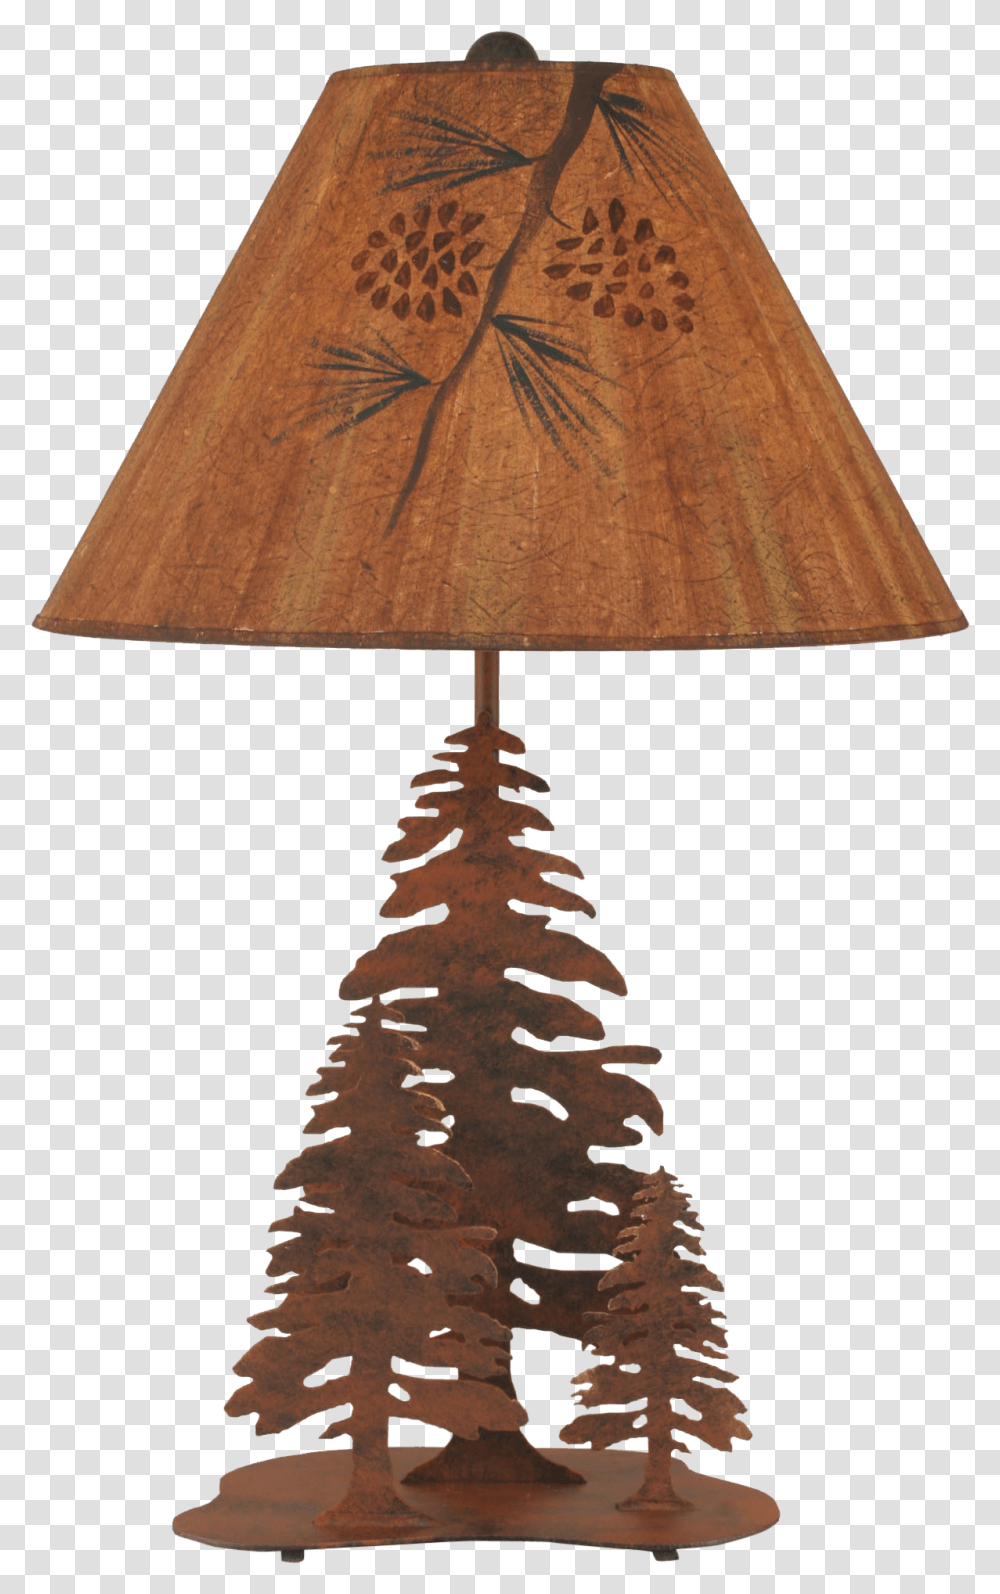 Tree Table Lamp With Pine Branch Shade Cabin Lamp Shades Design, Lampshade Transparent Png